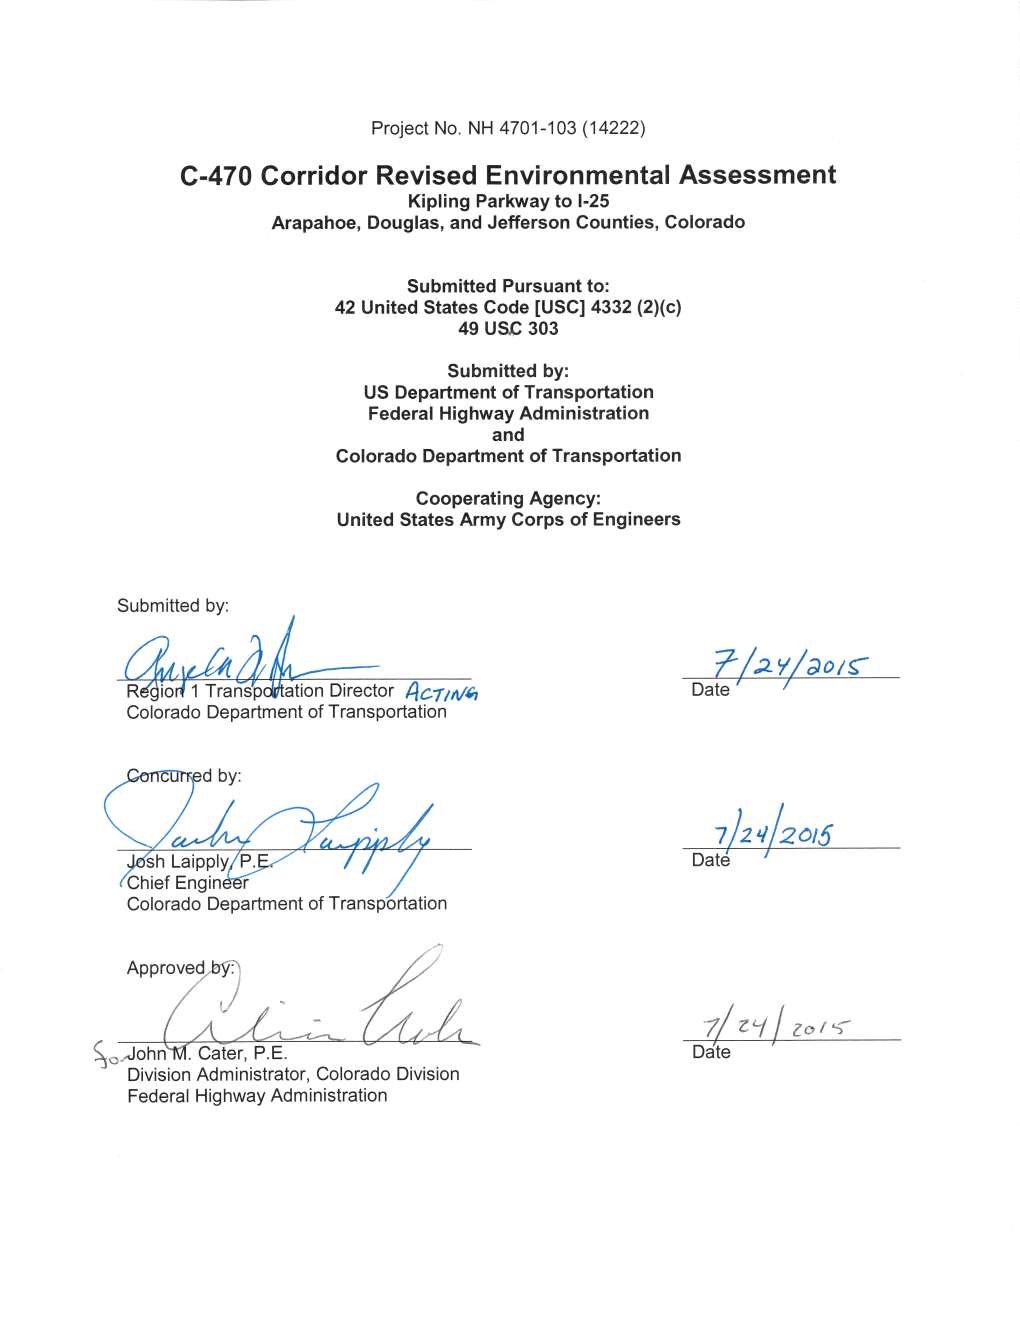 Environmental Assessment (EA), a Copy of the Document Will Be Available for Review at Each of the Following Locations